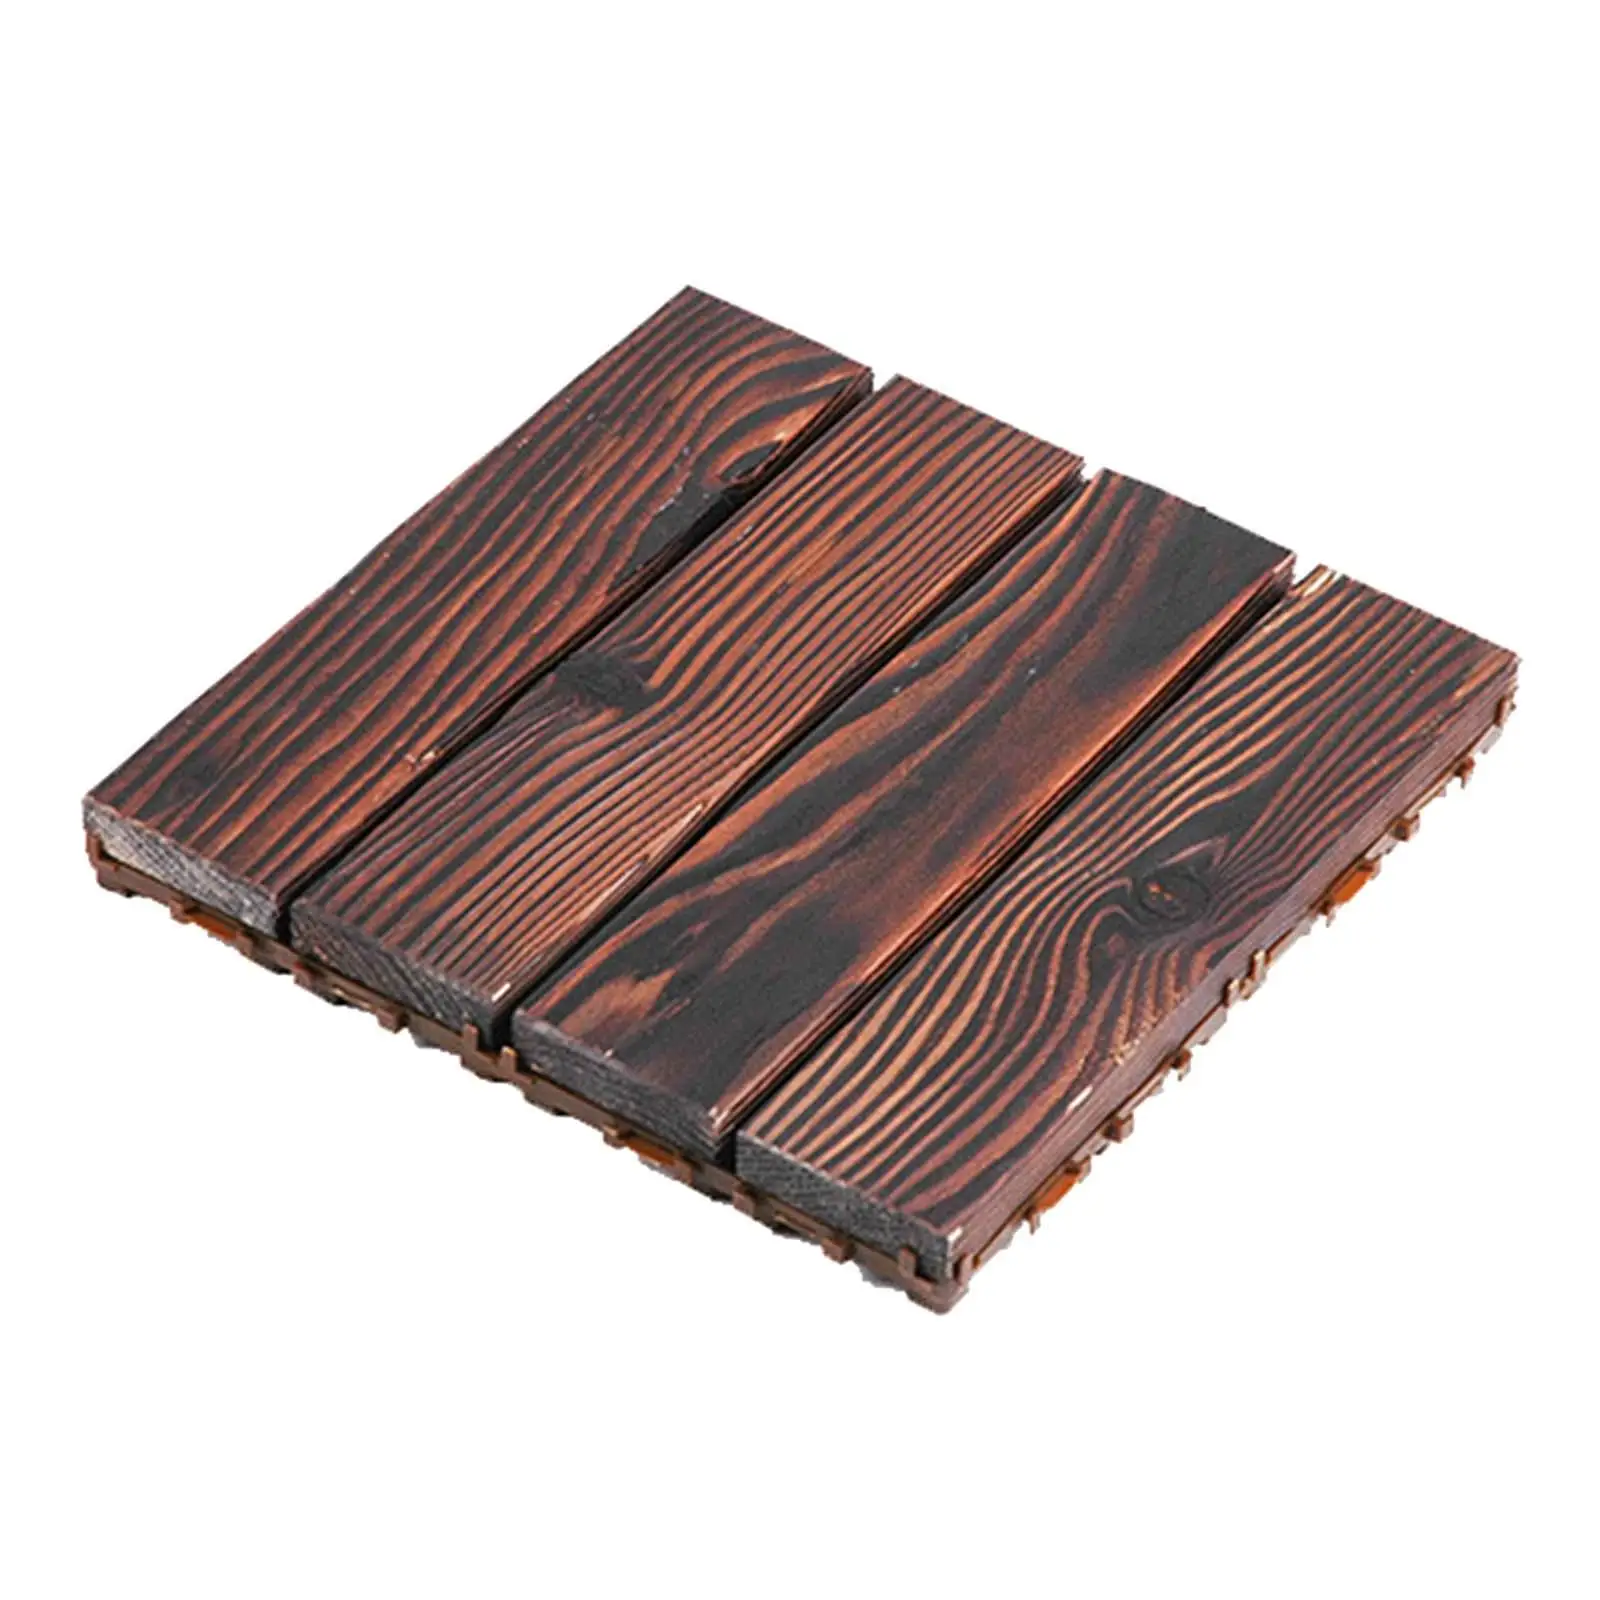 Interlocking Deck Tiles Durable Waterproof Wood Interlocking Flooring Tiles Patio Flooring Paver for Pathway Home Patio Outside